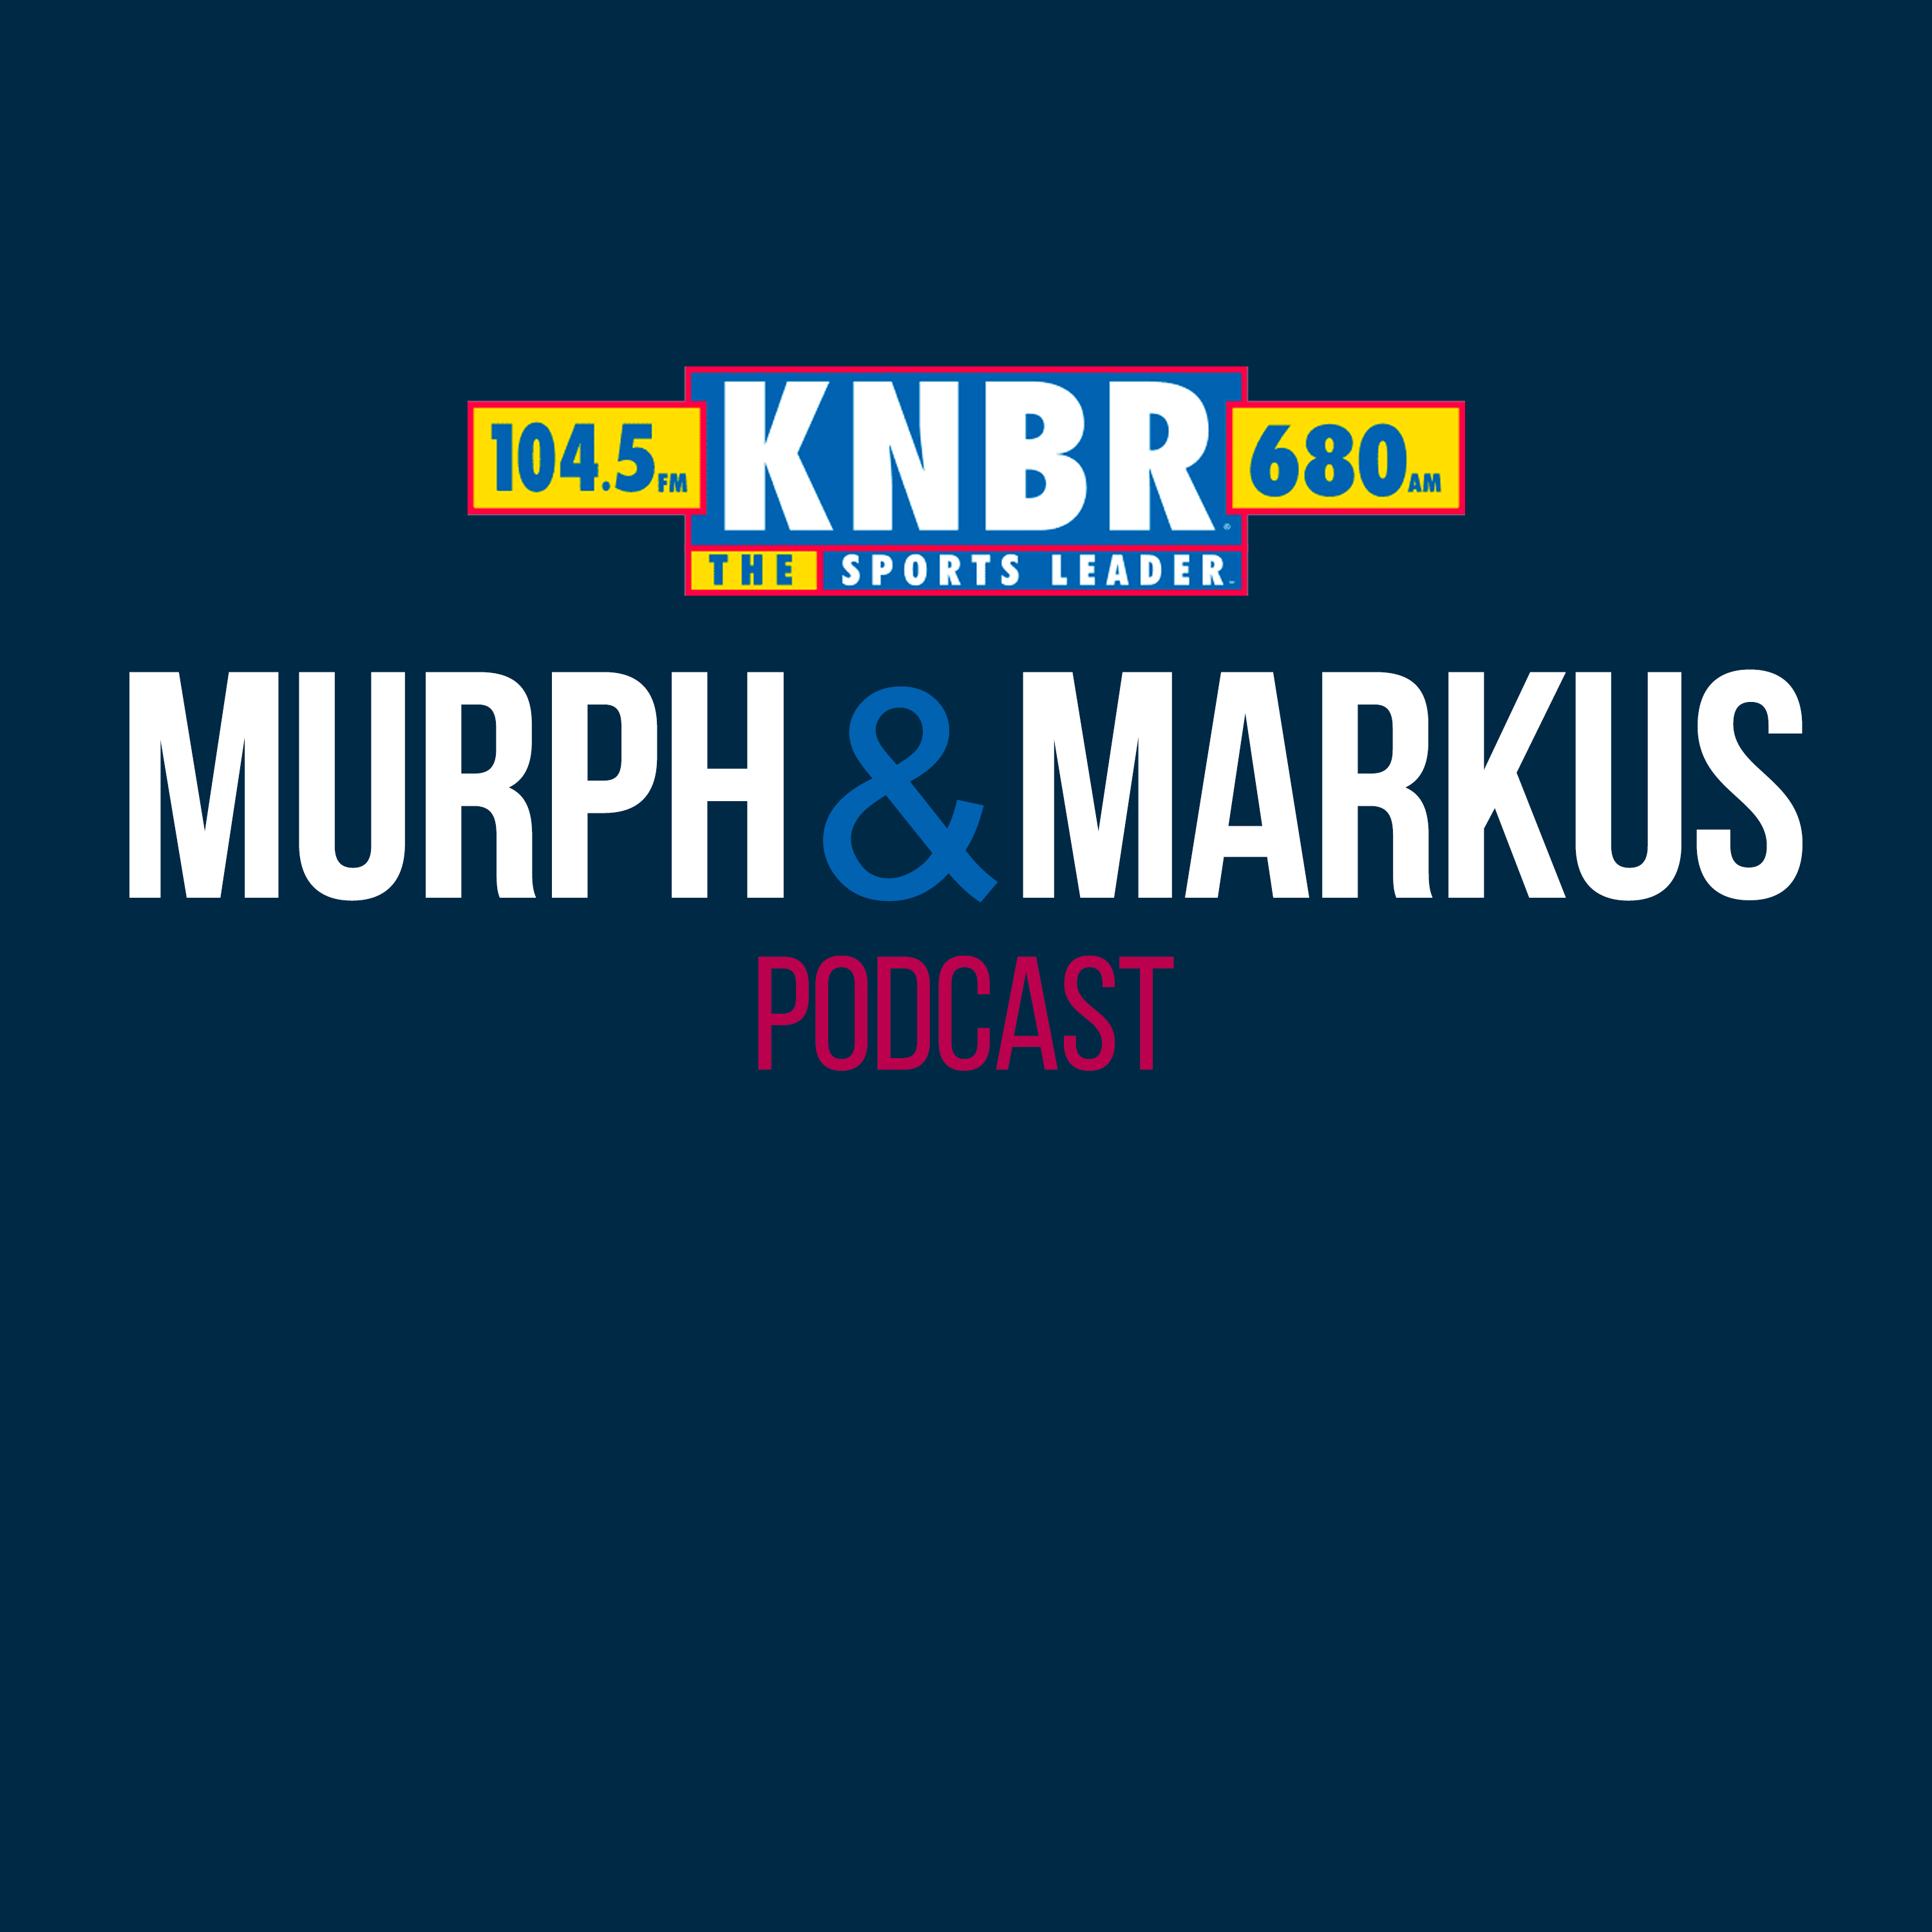 5-16 Hour 1: Murph & Markus react to the Giants beating the Dodgers in game 3 of the series, share their thoughts on the 49ers new schedule, and predict the outcome for each game